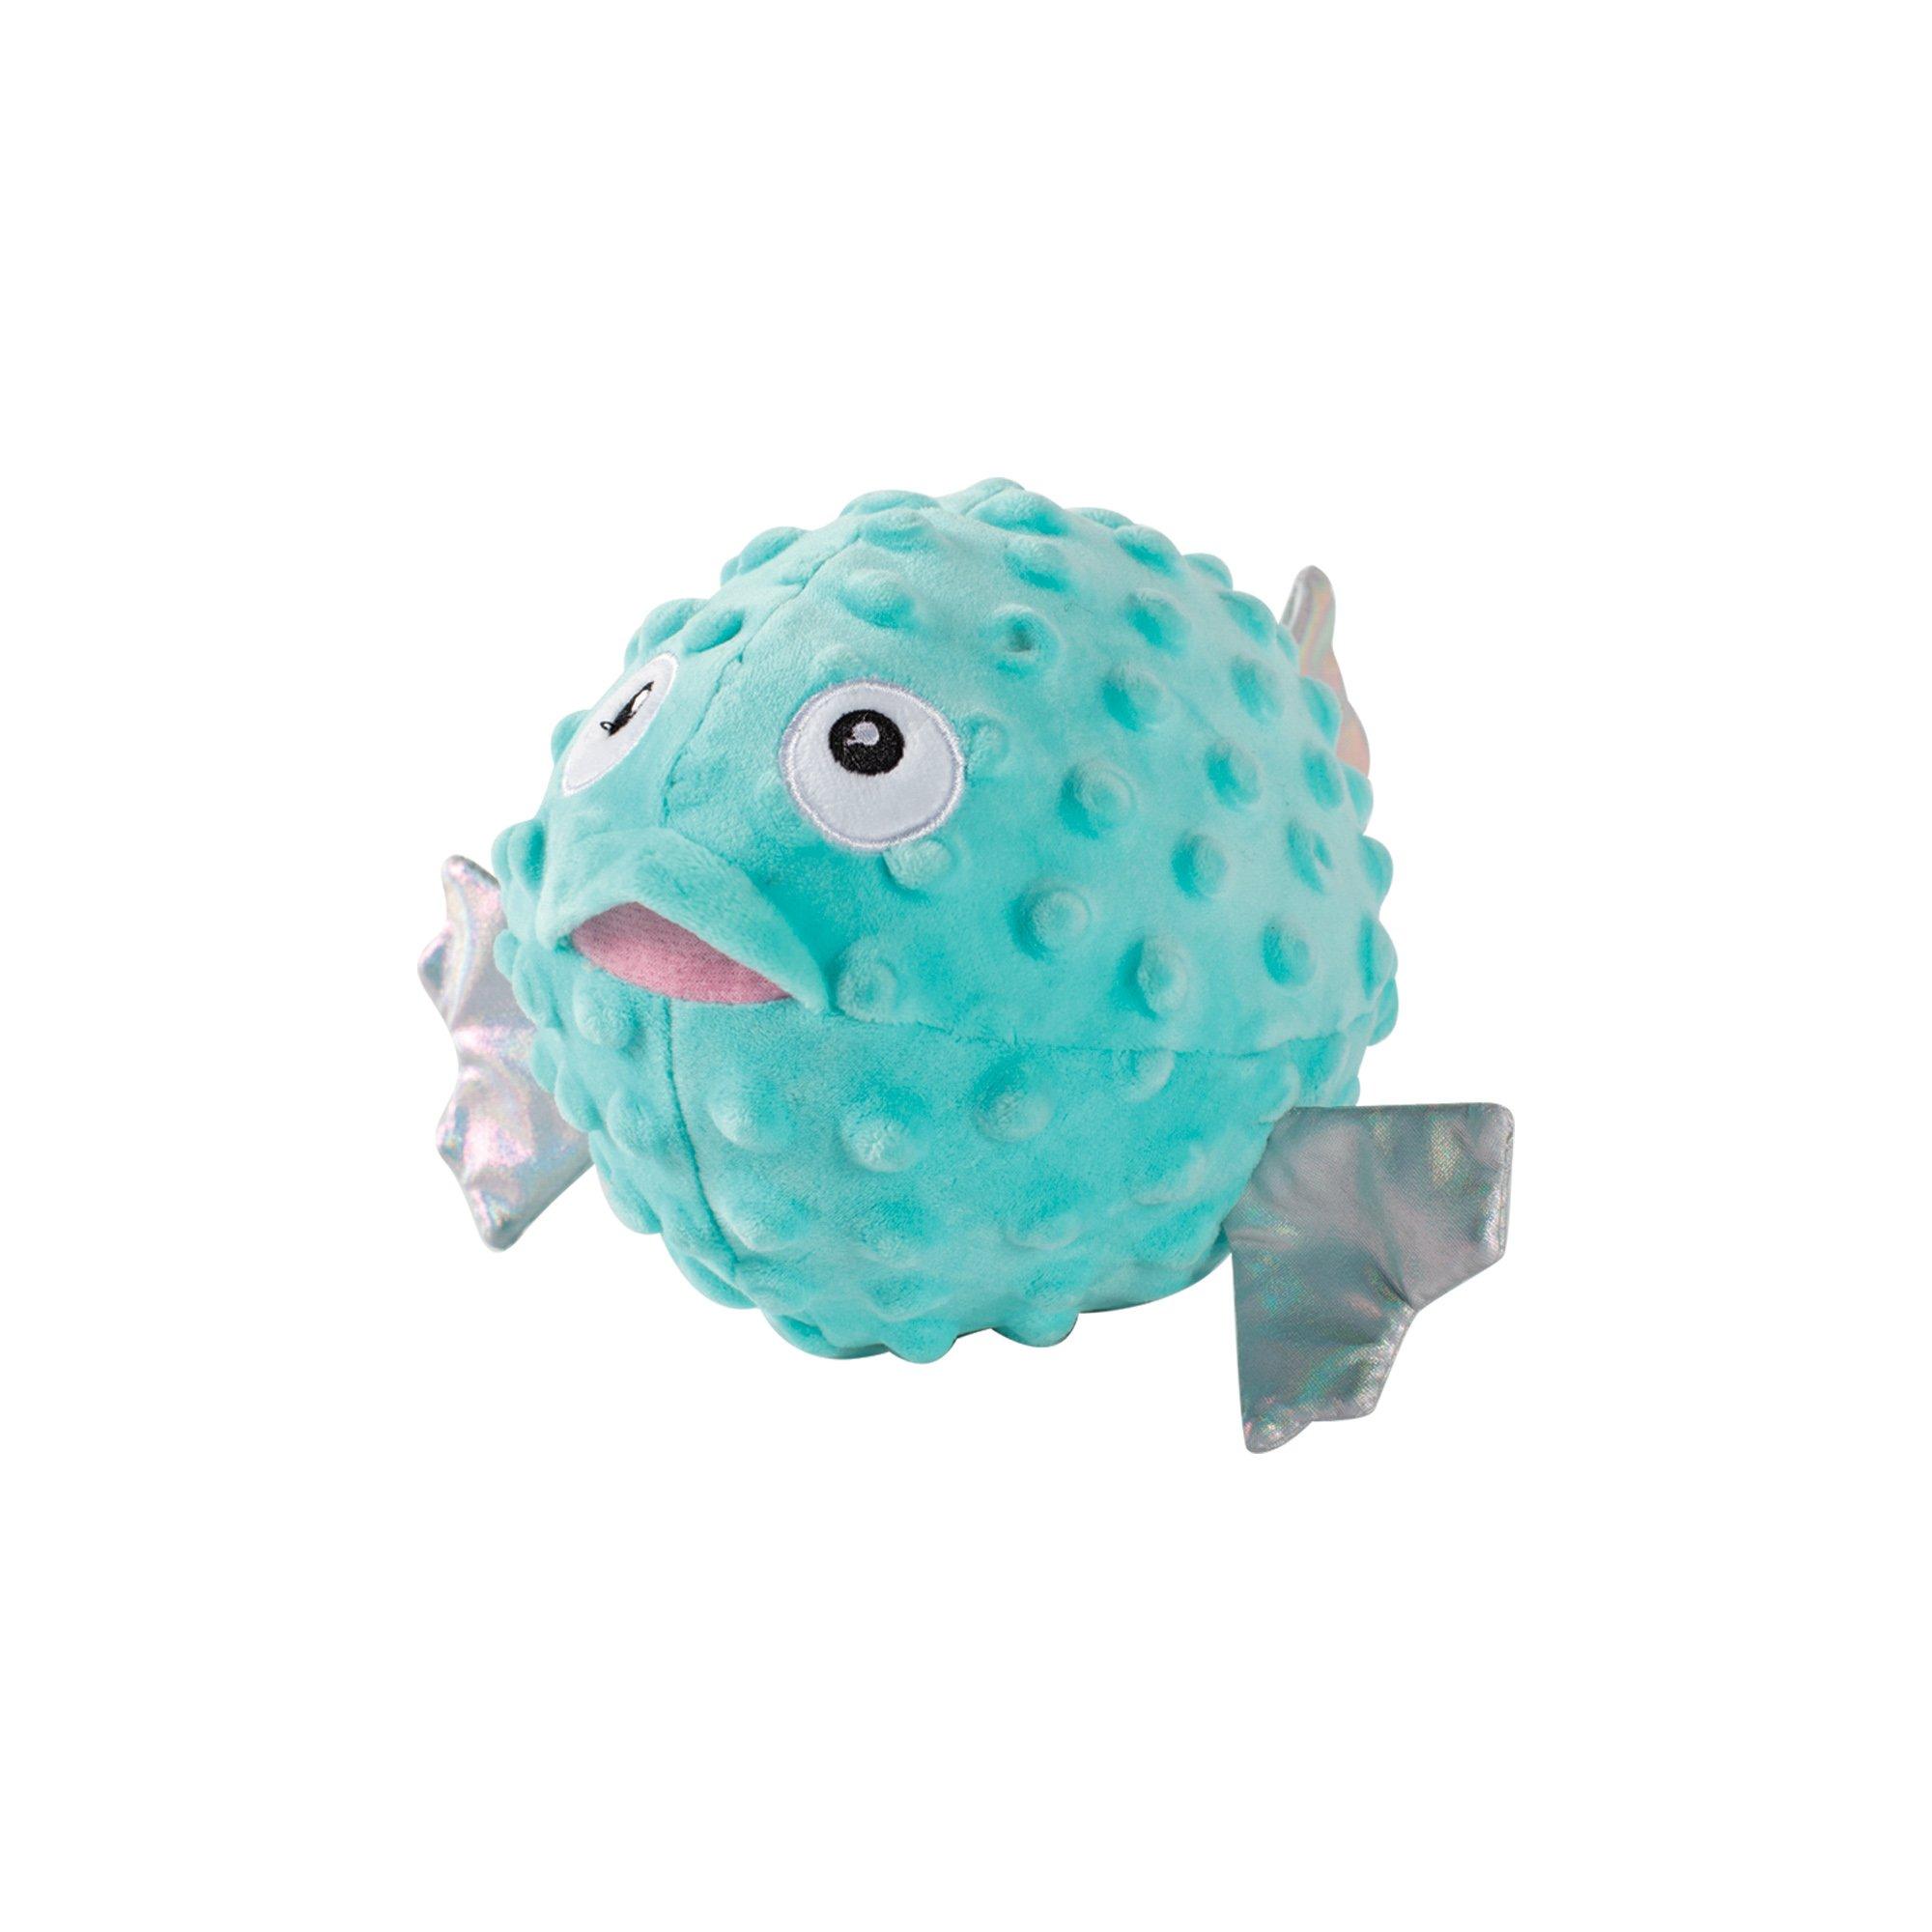 Puffed Up Pufferfish Squeaker Dog Toy